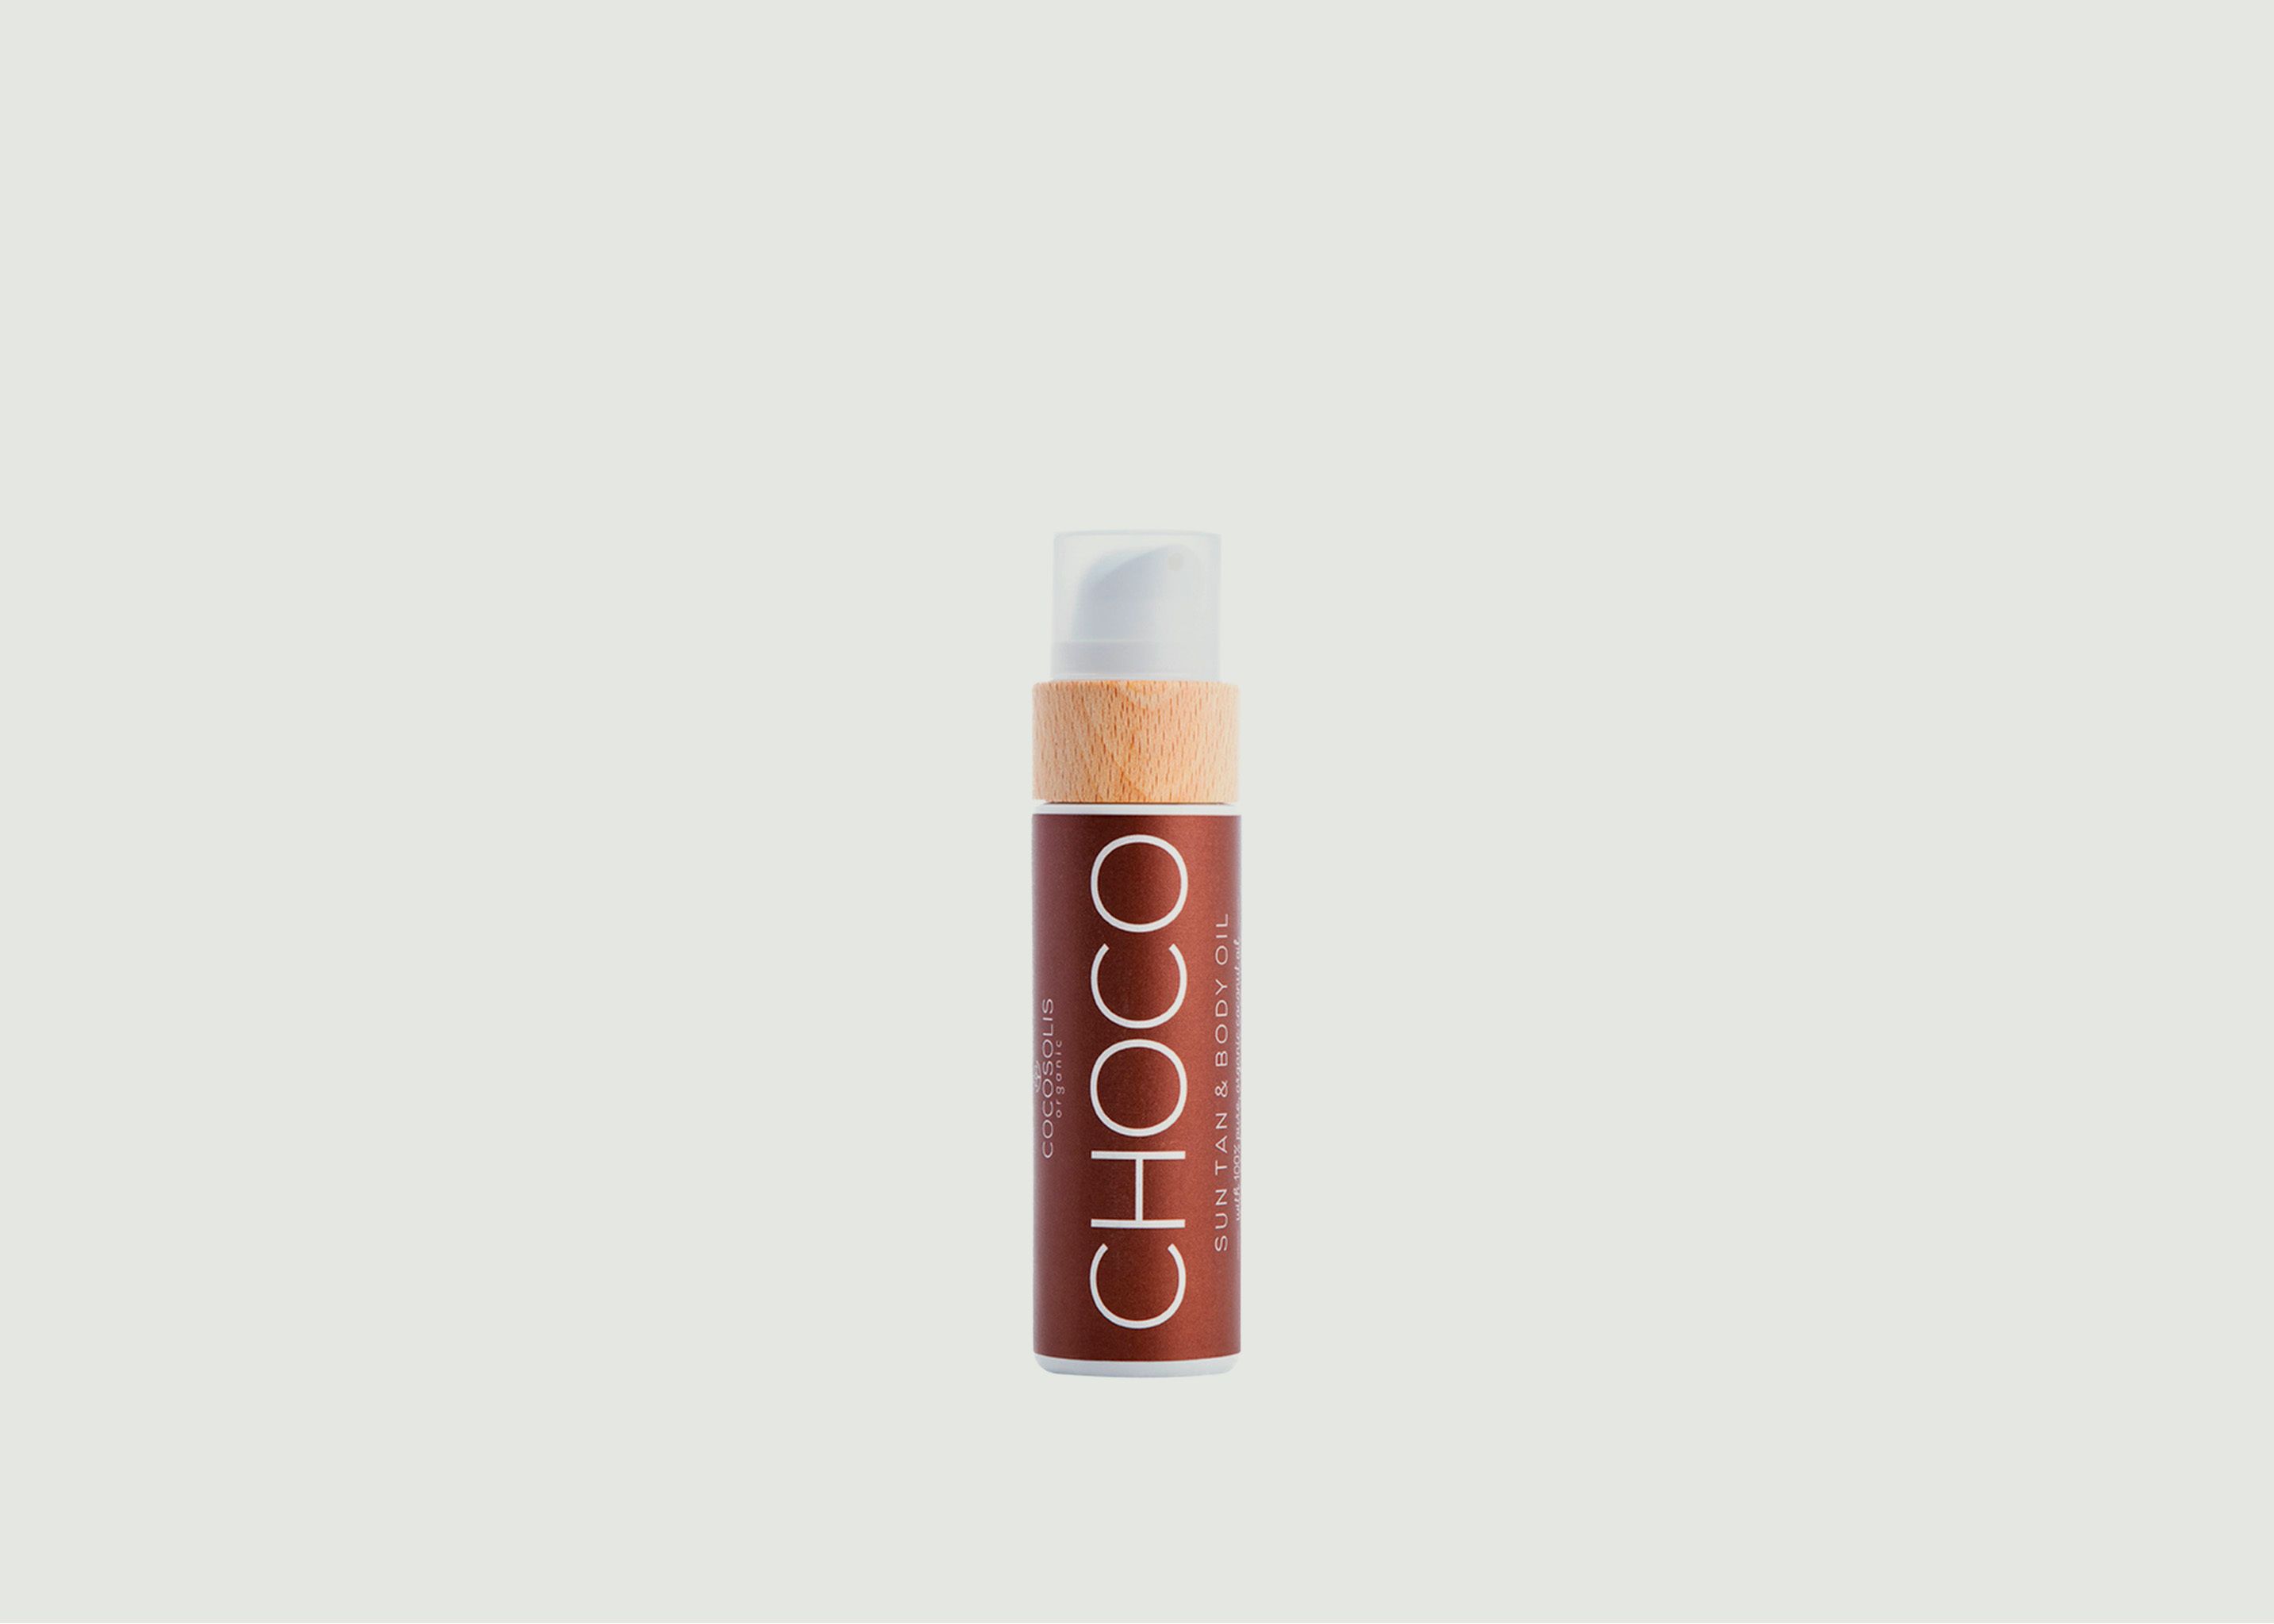 Choco body and tanning oil  - Cocosolis